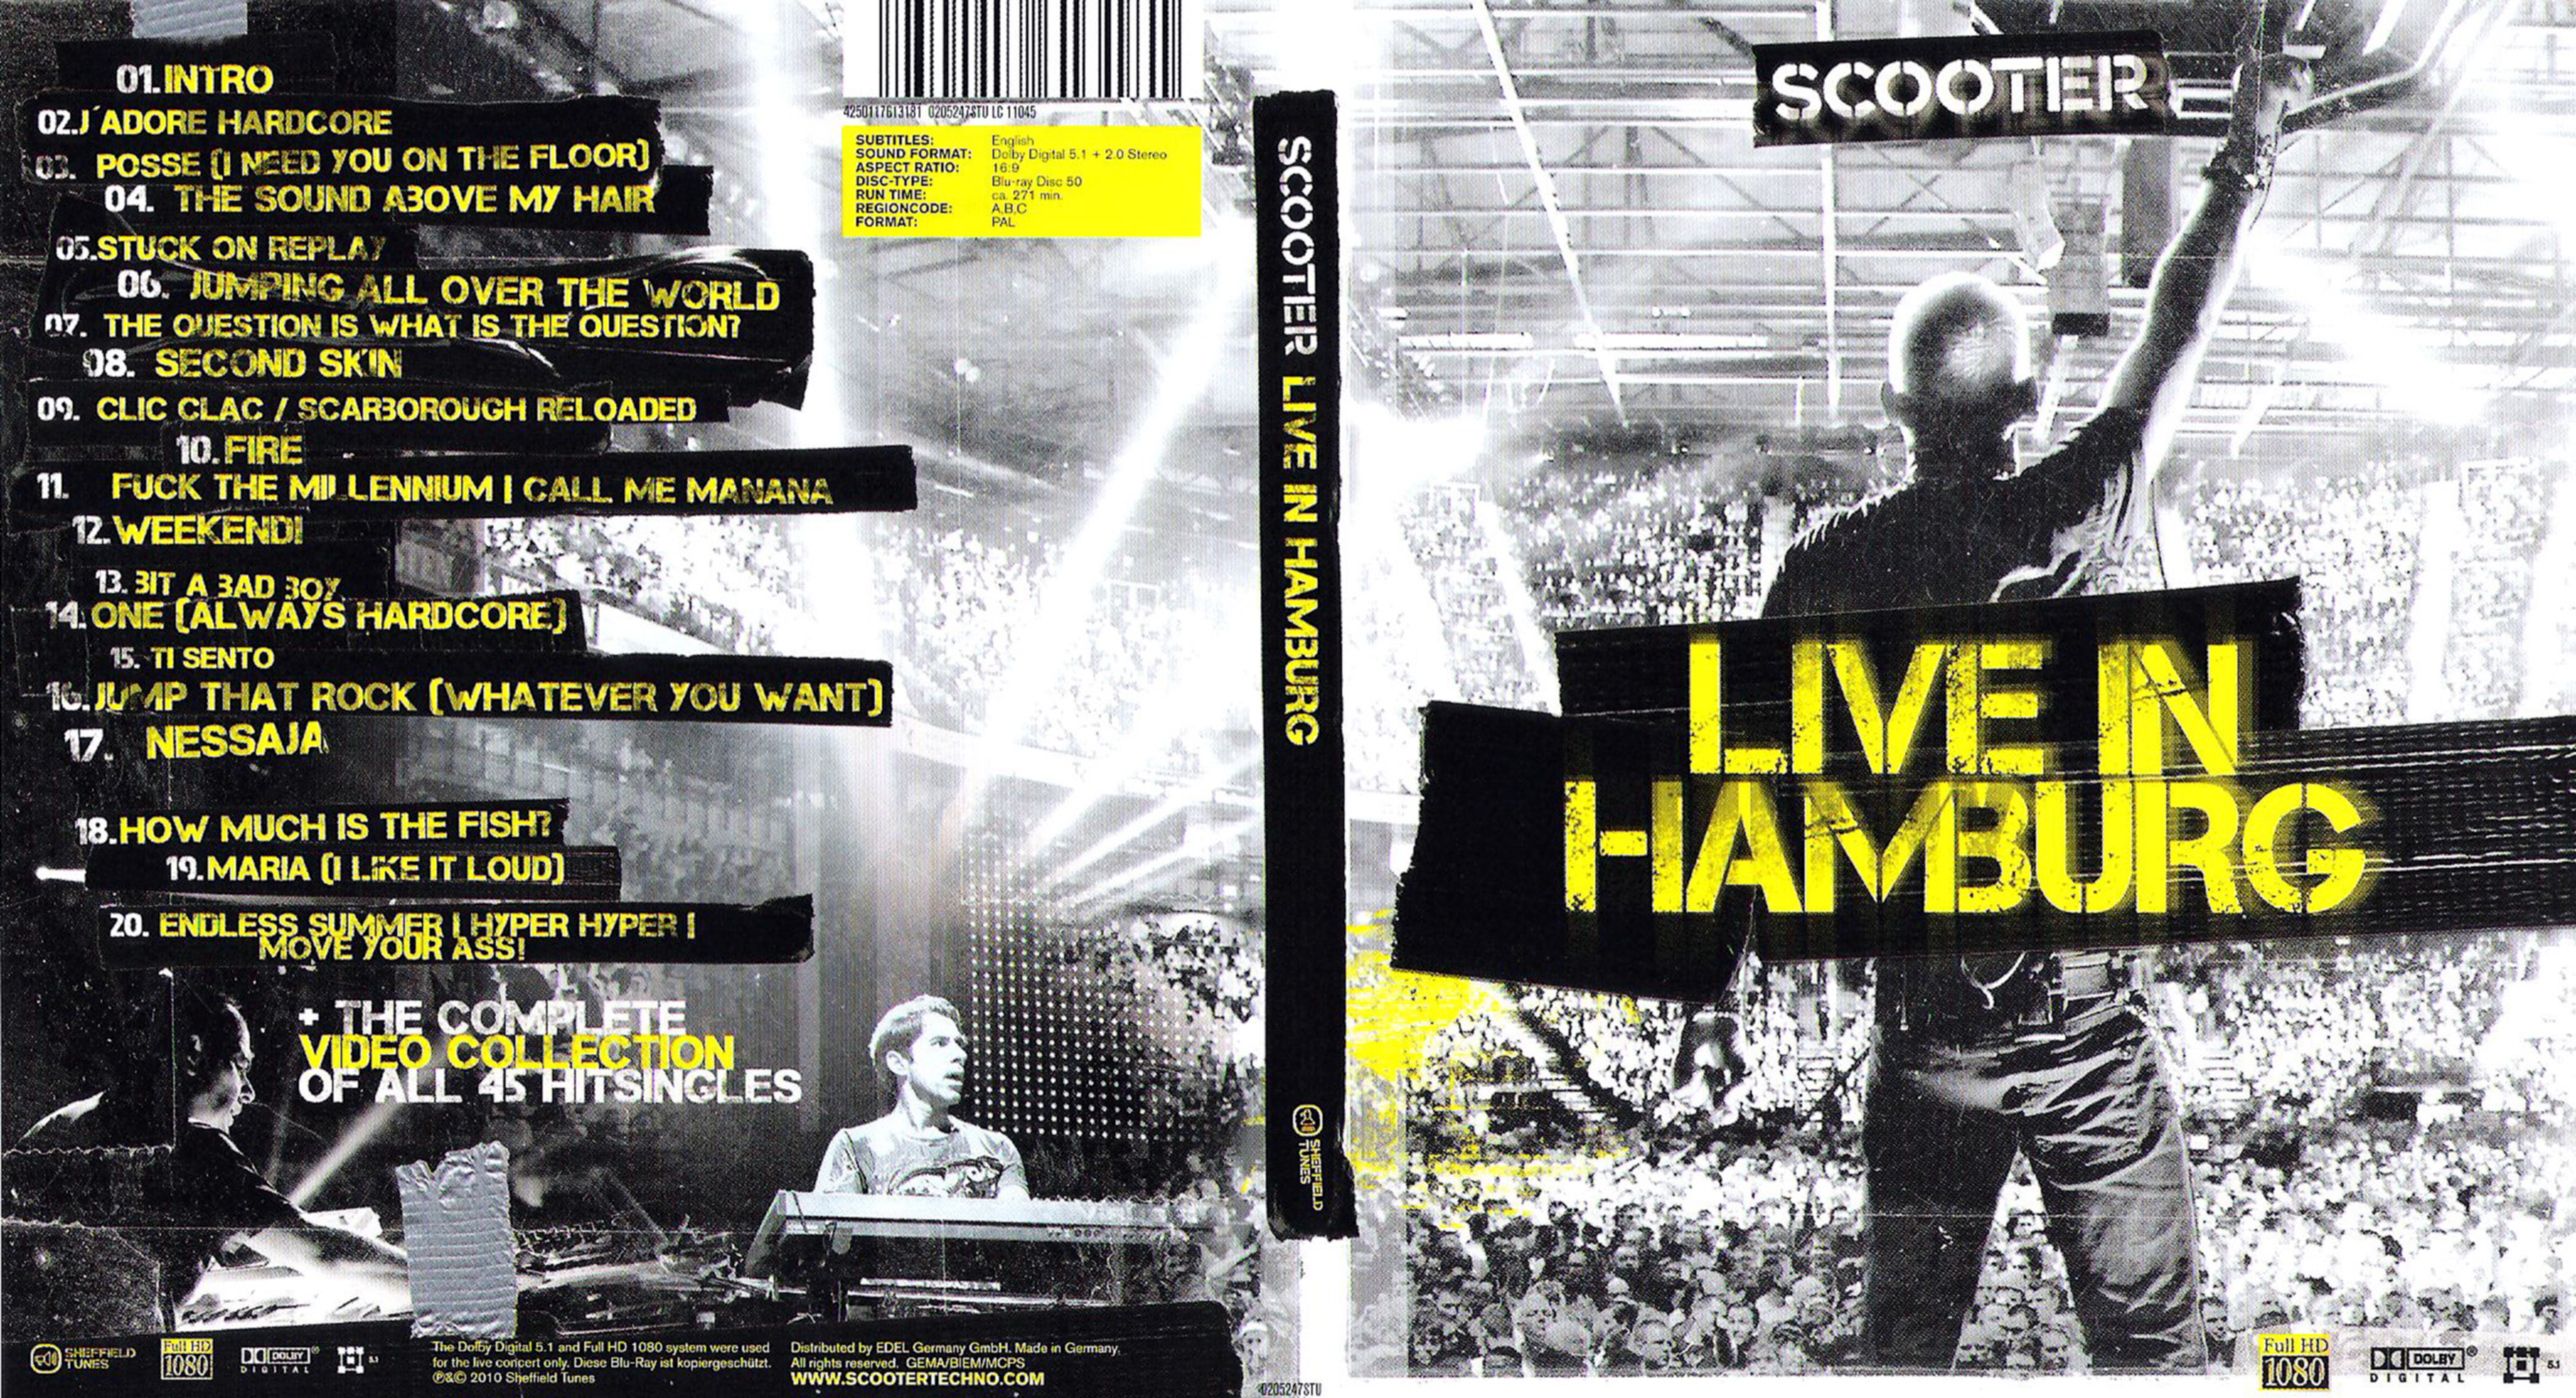 Jaquette DVD Scooter live in hamburg (BLU-RAY)